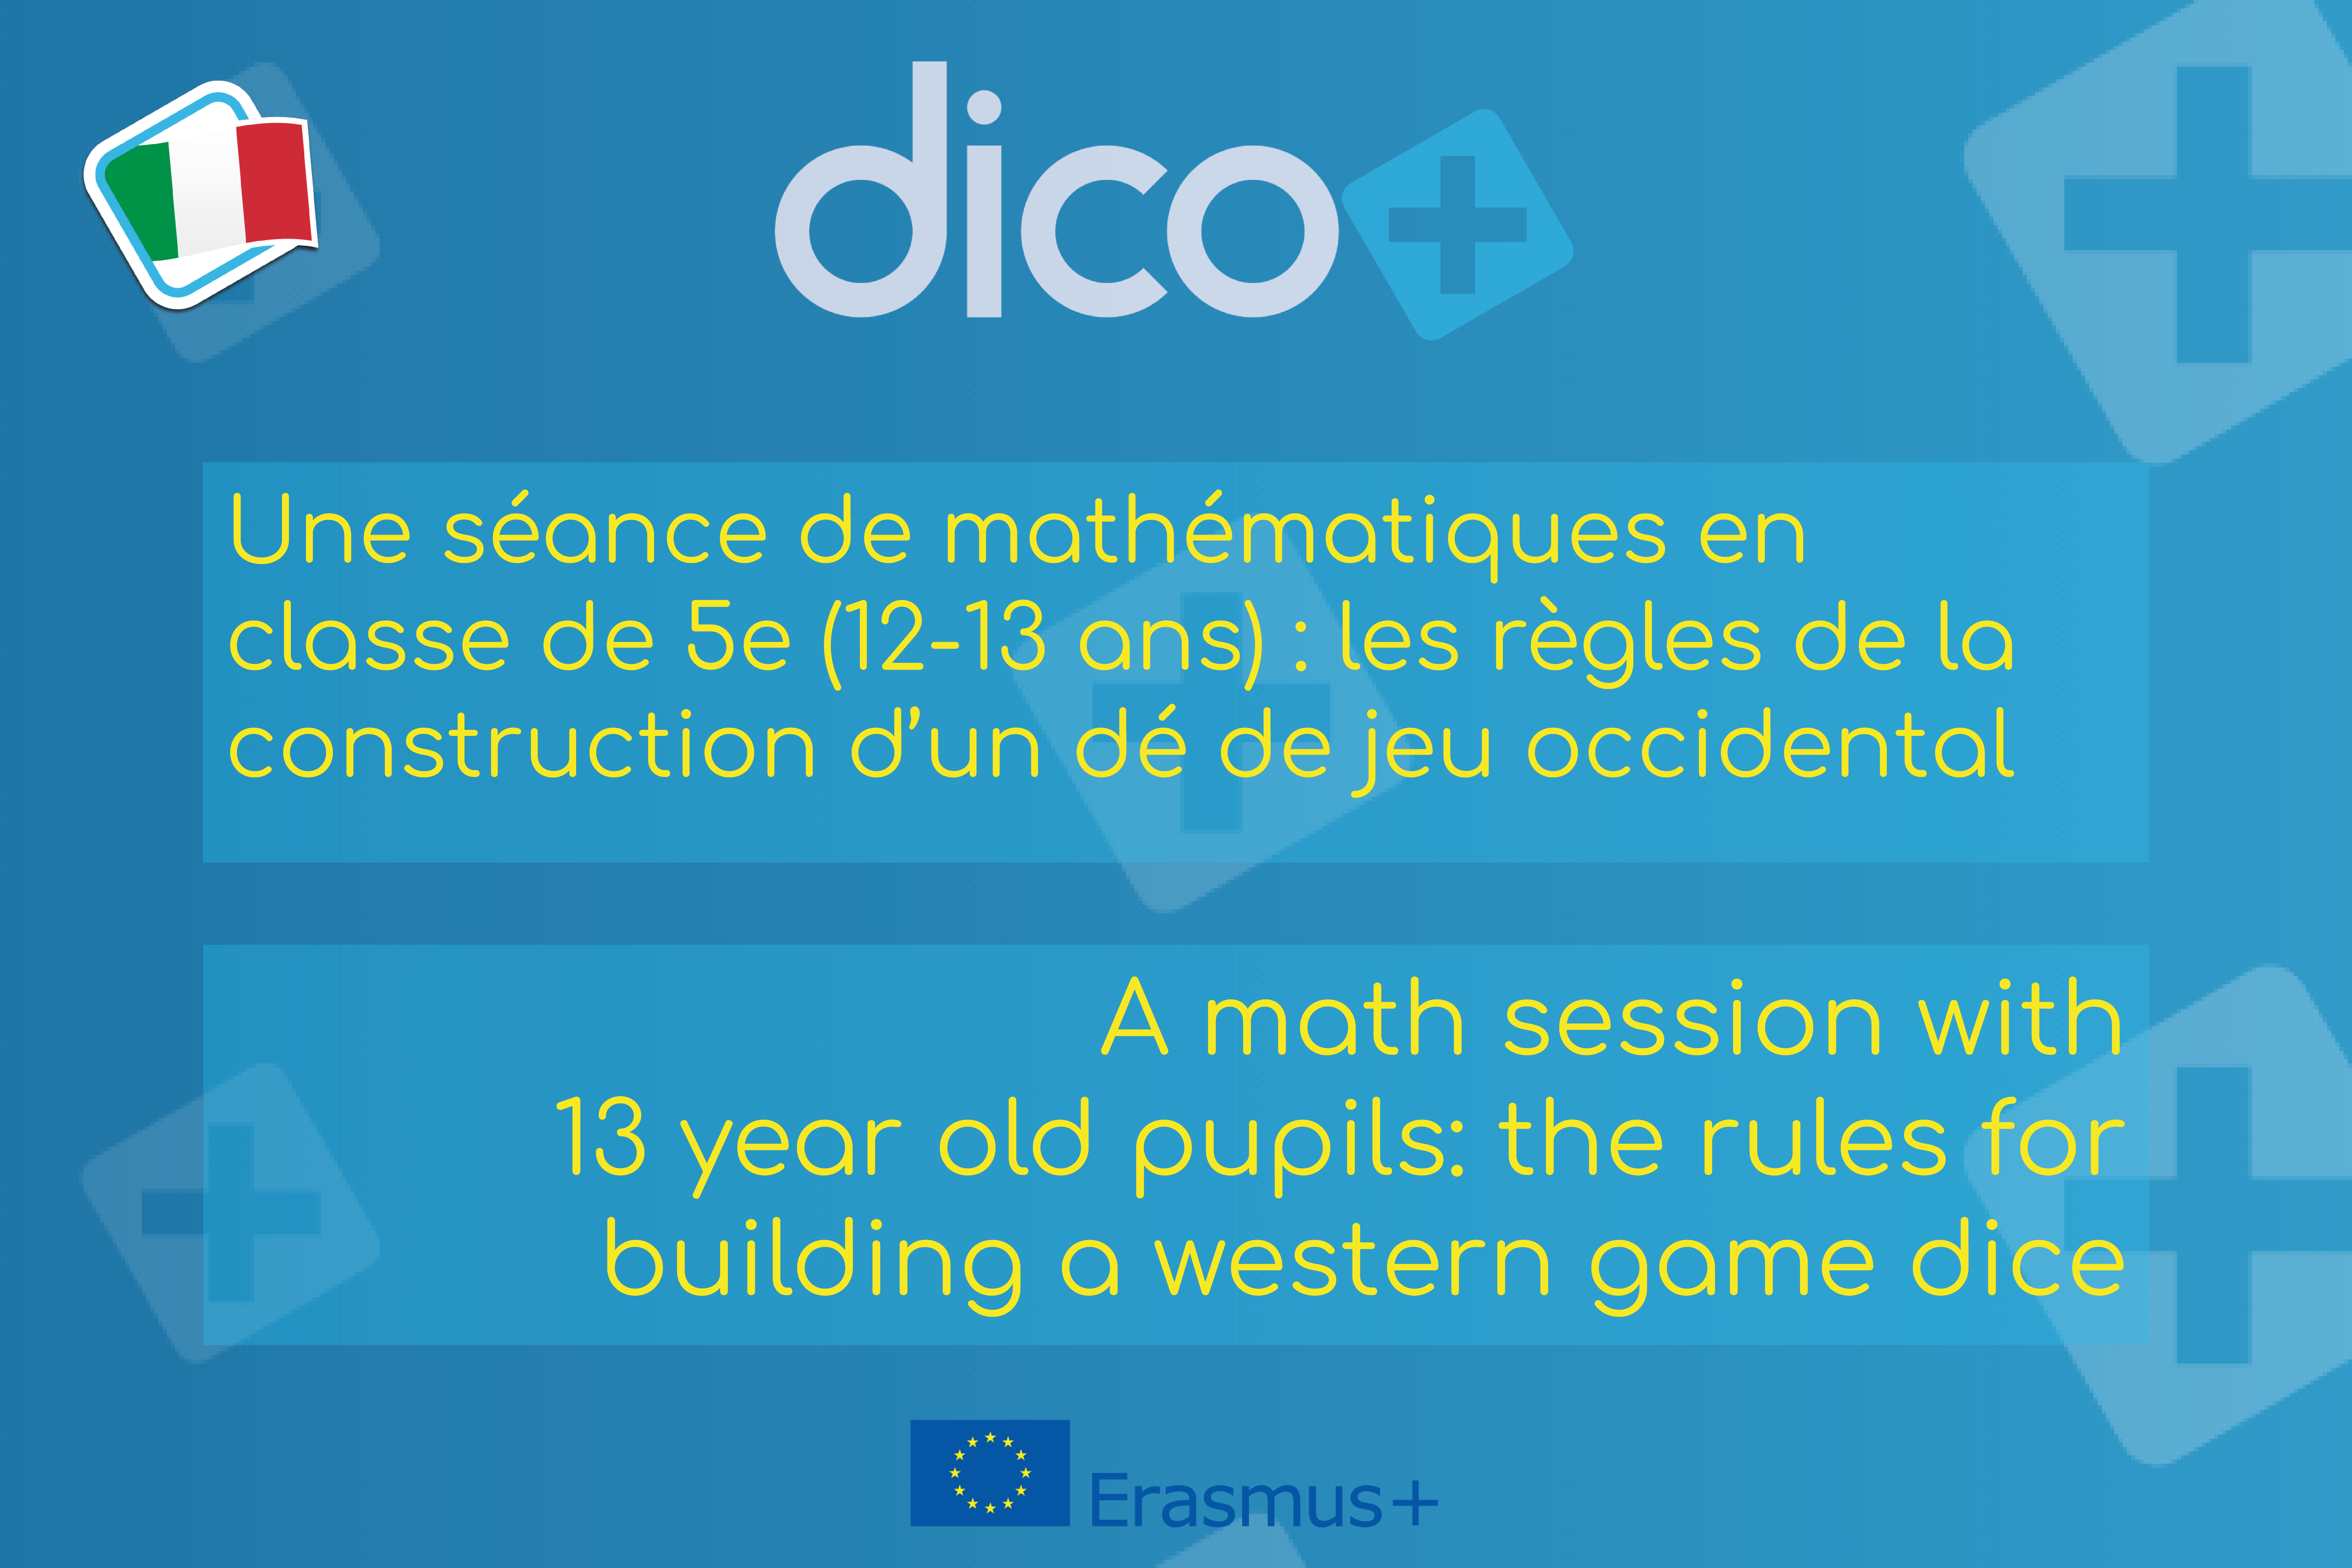 A maths session with 13 year old pupils: The rules for constructing a Western game dice